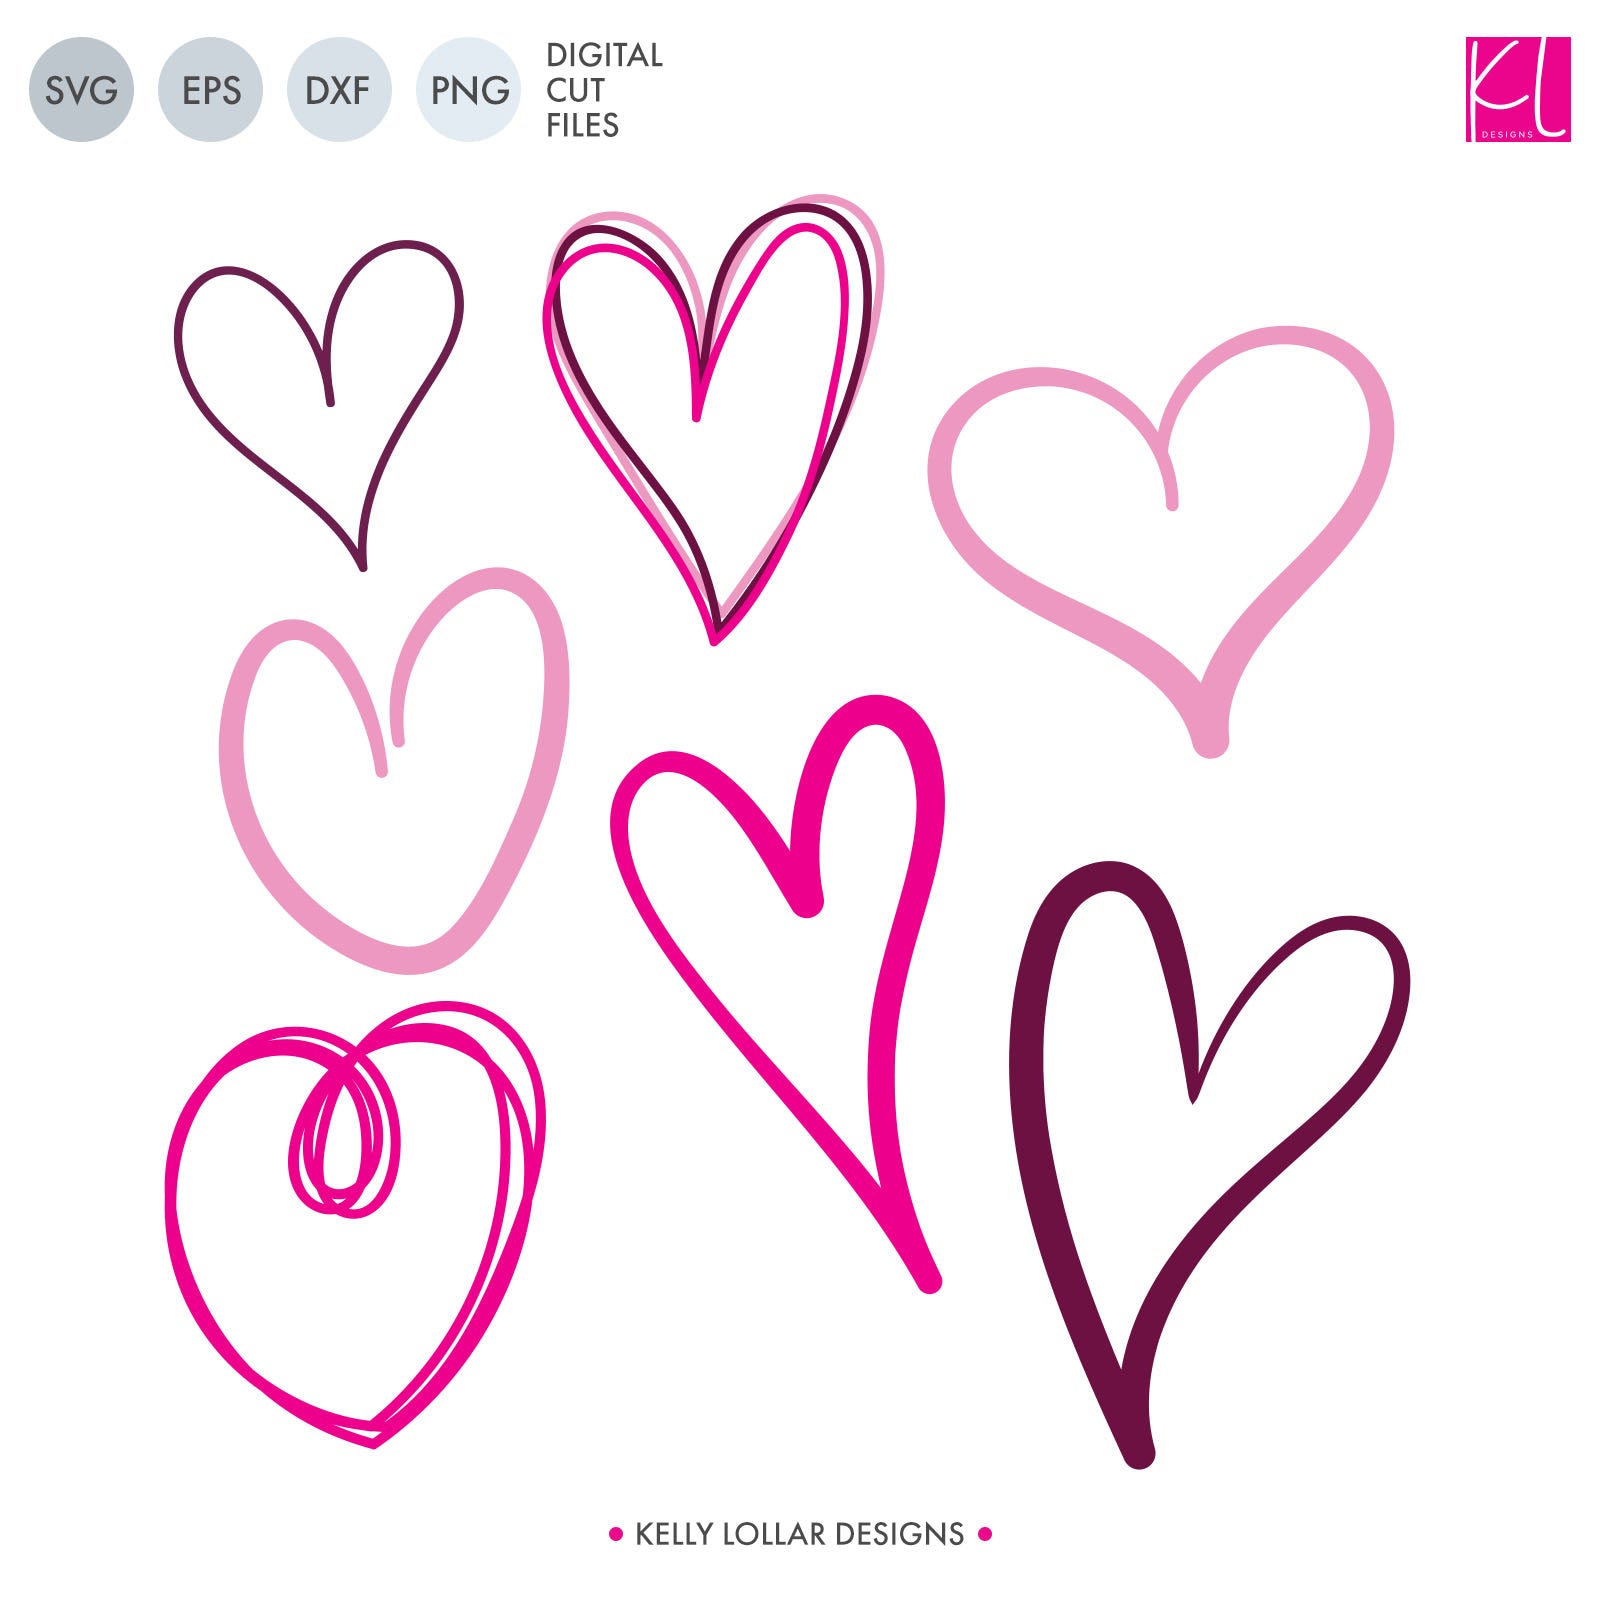 Download Free Doodle Hearts SVG Cut Files - Kelly Lollar Designs